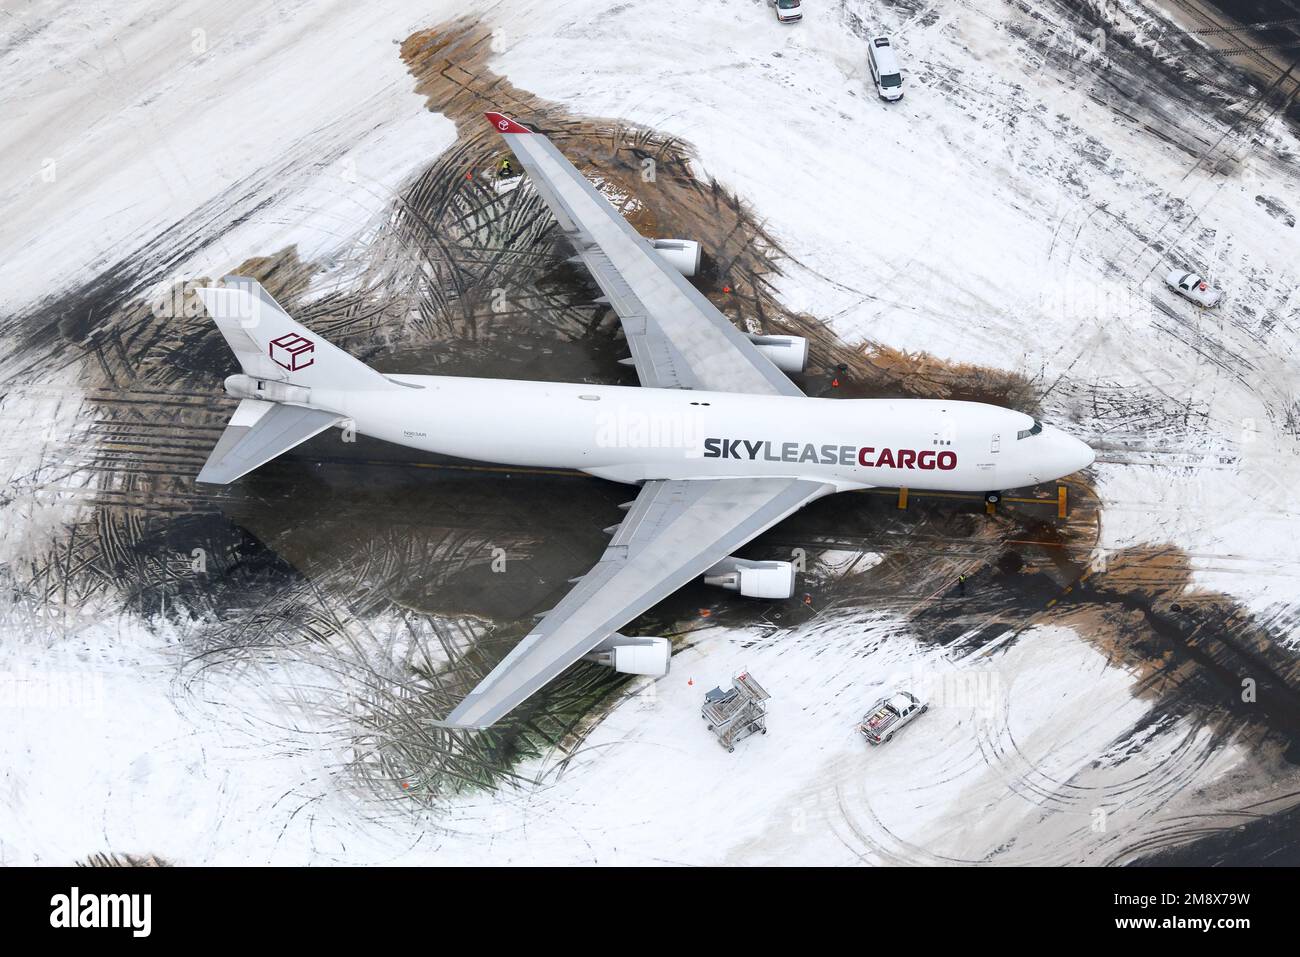 Skylease cargo Boeing 747-400 aircraft parked at Anchorage Airport after snow. Airplane 747-400F of Sky Lease Cargo after snow storm. Stock Photo